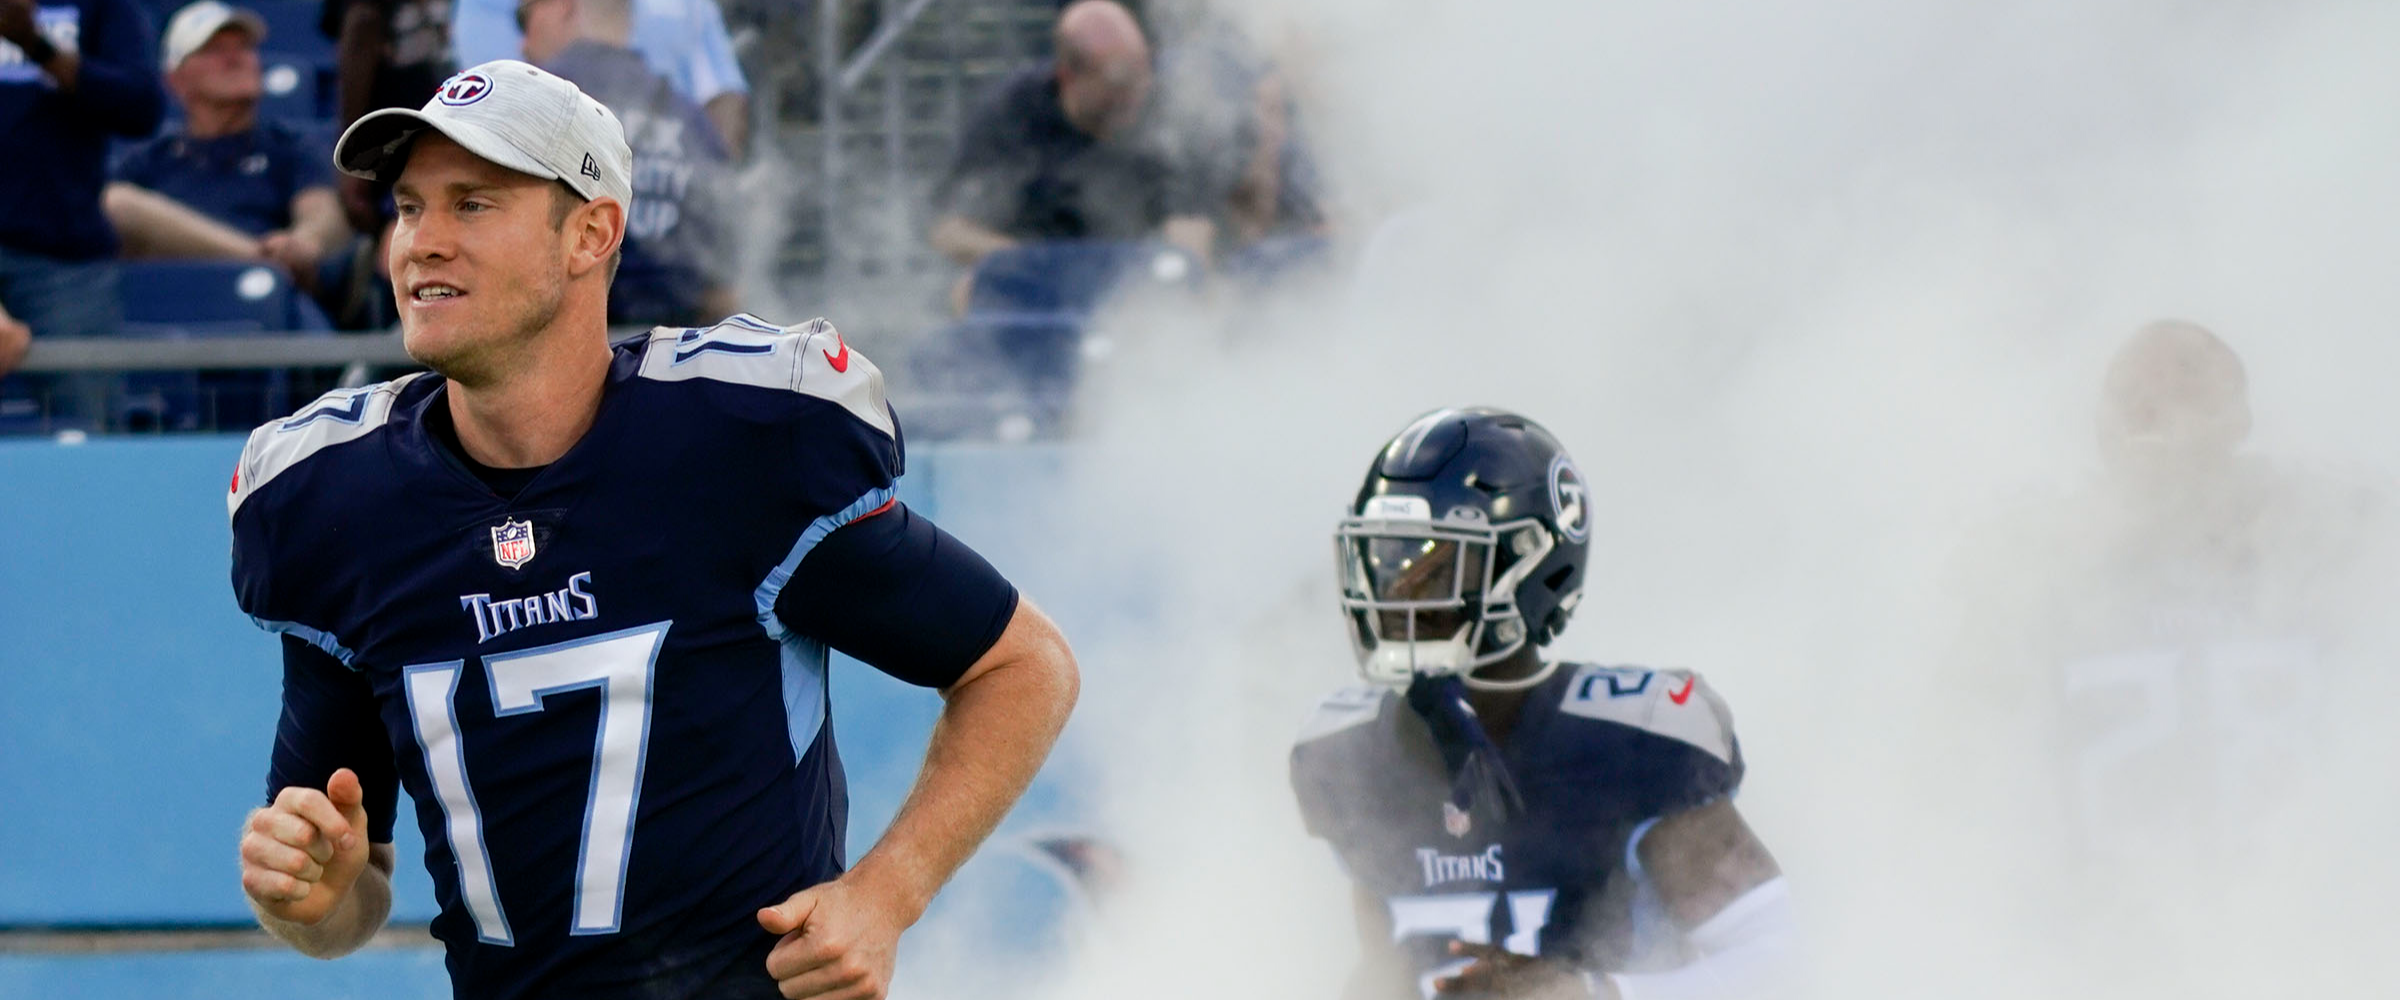 Titans: Is it smart to not play the starters at all in the preseason?